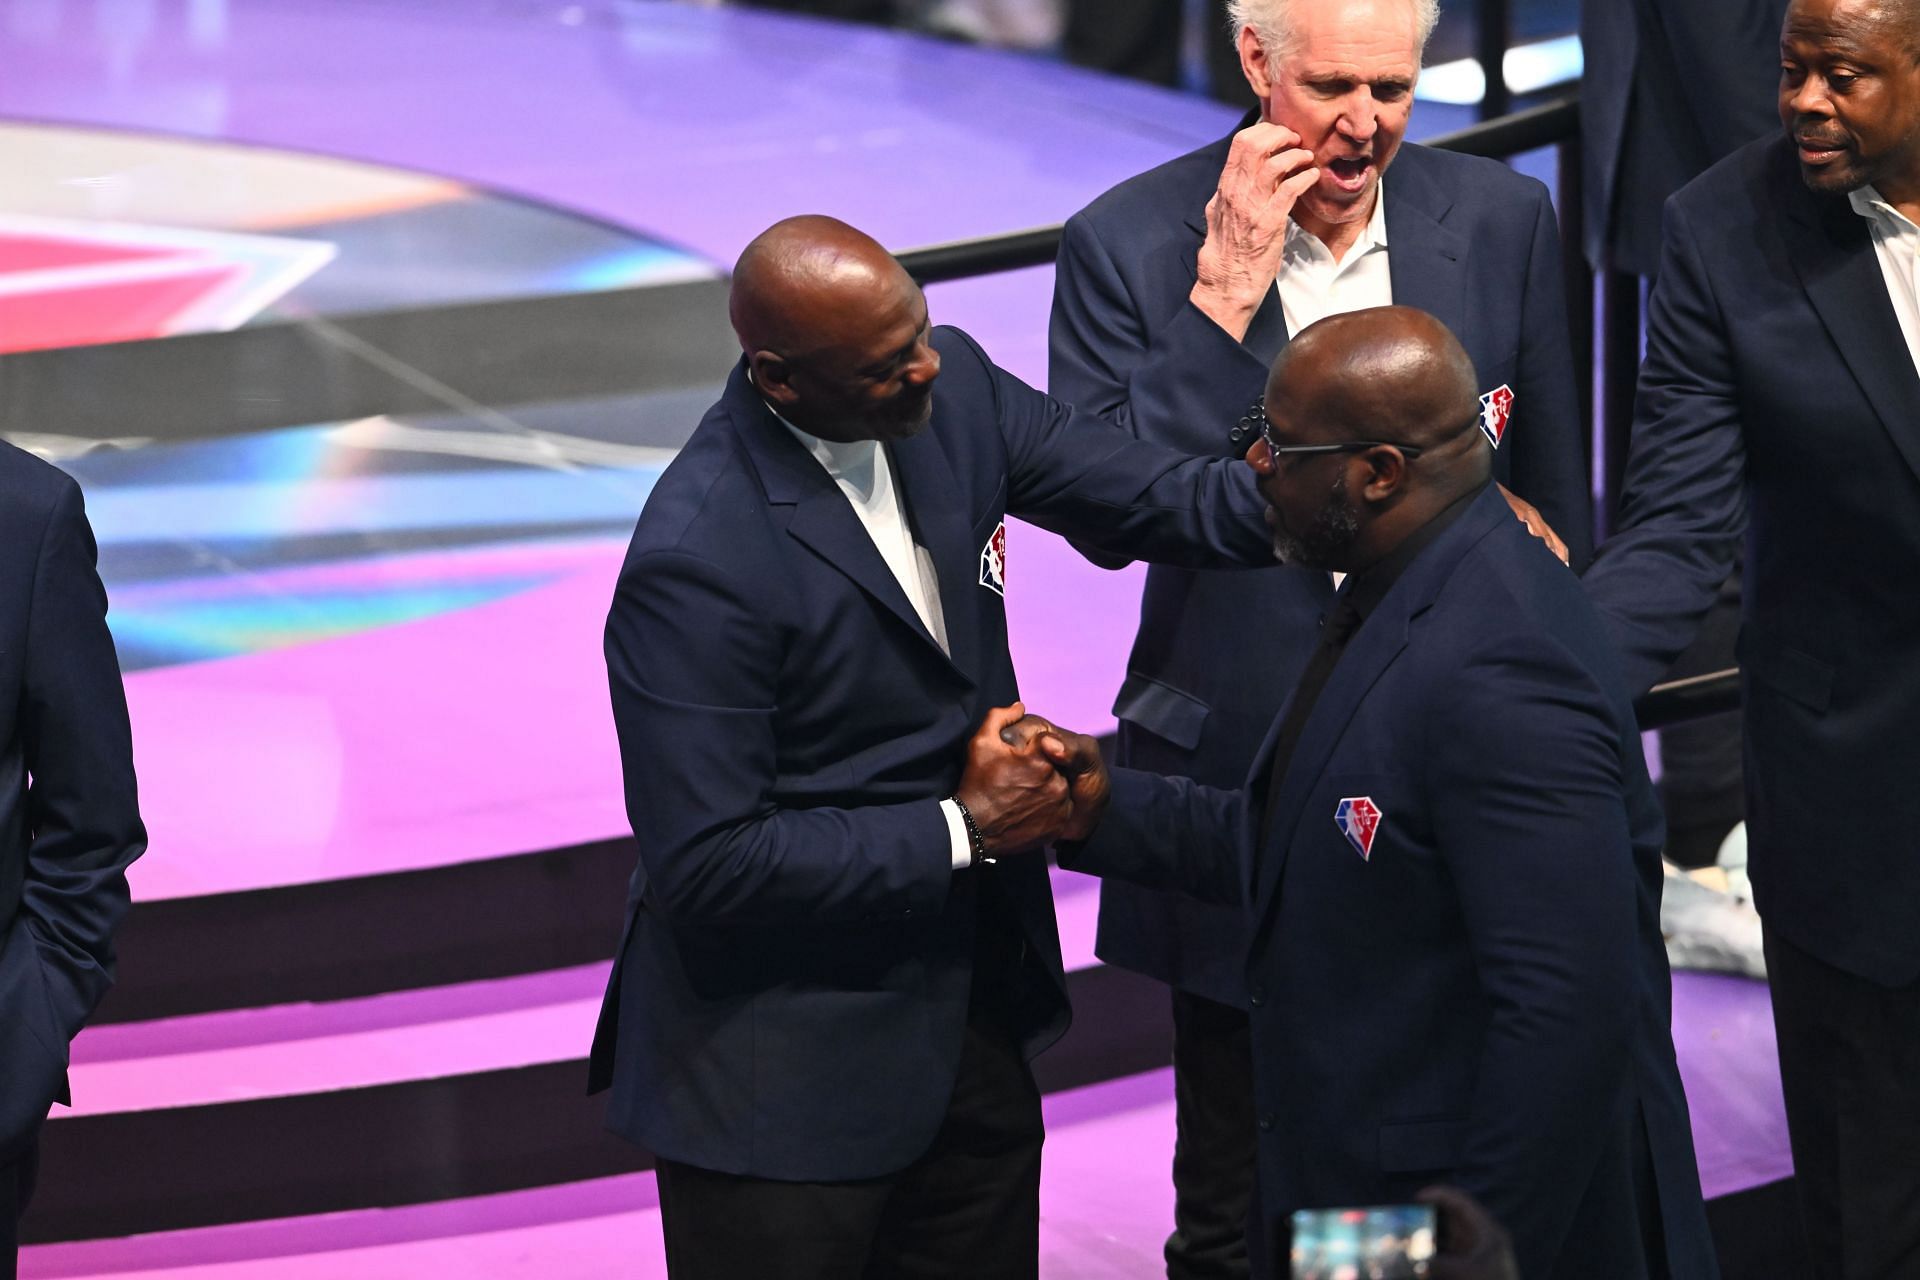 Shaquille O&#039;Neal, right, and Michael Jordan interact after introduced as part of the NBA 75th Anniversary Team during the All-Star Game on Febr. 20 in Cleveland, Ohio.